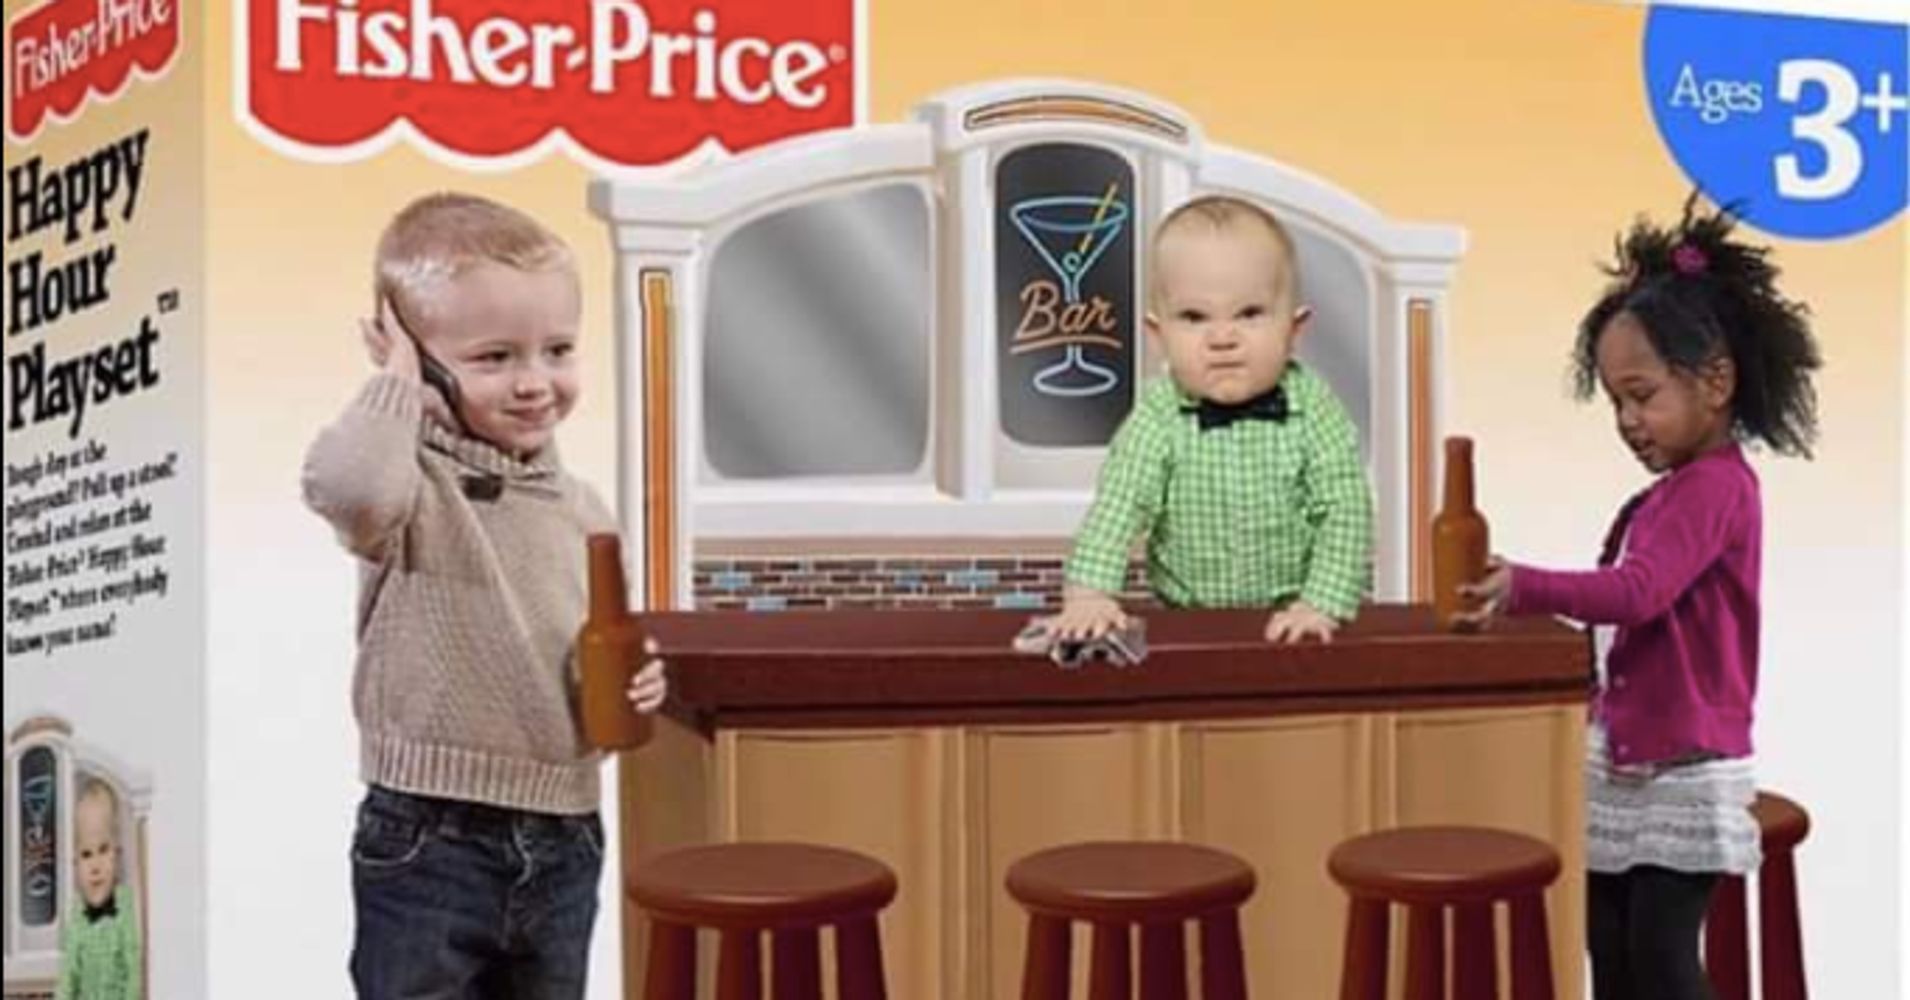 No, FisherPrice Isn't Selling A 'Happy Hour Playset